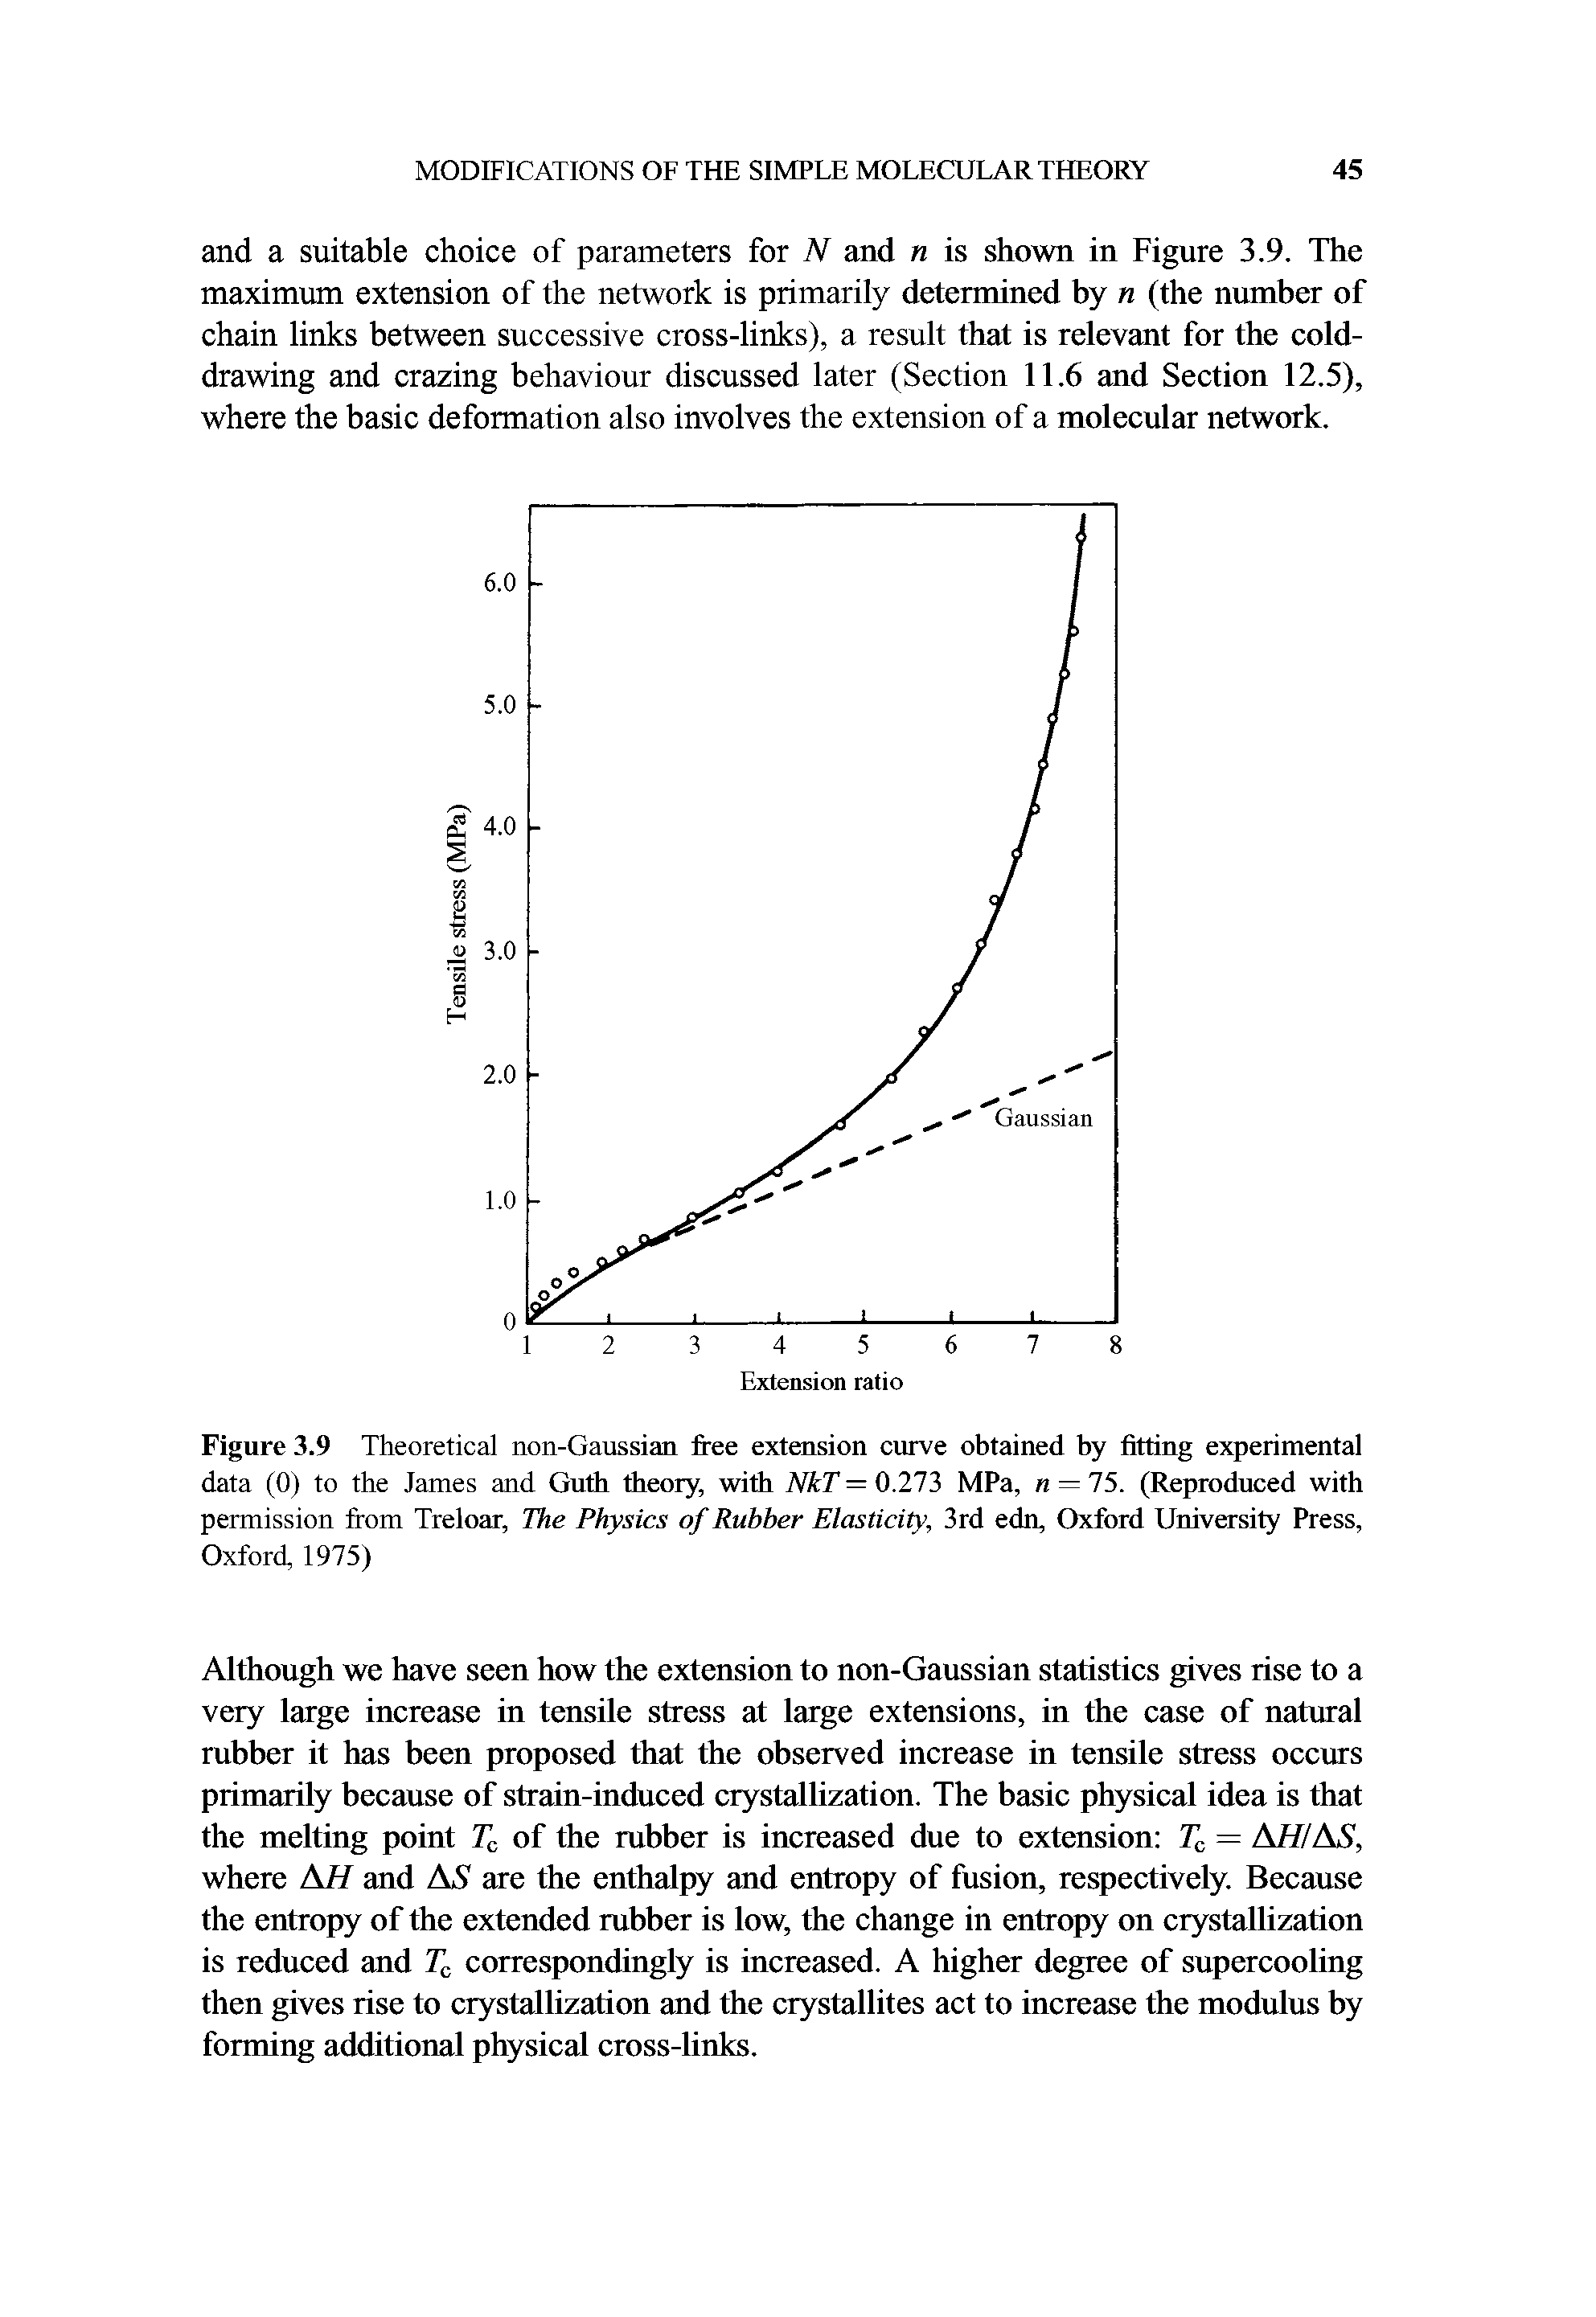 Figure 3.9 Theoretical non-Gaussian free extension curve obtained by fitting experimental data (0) to the James and Guth theory, with NkT = 0.273 MPa, n — 75. (Reproduced with permission from Treloar, The Physics of Rubber Elasticity, 3rd edn, Oxford University Press, Oxford, 1975)...